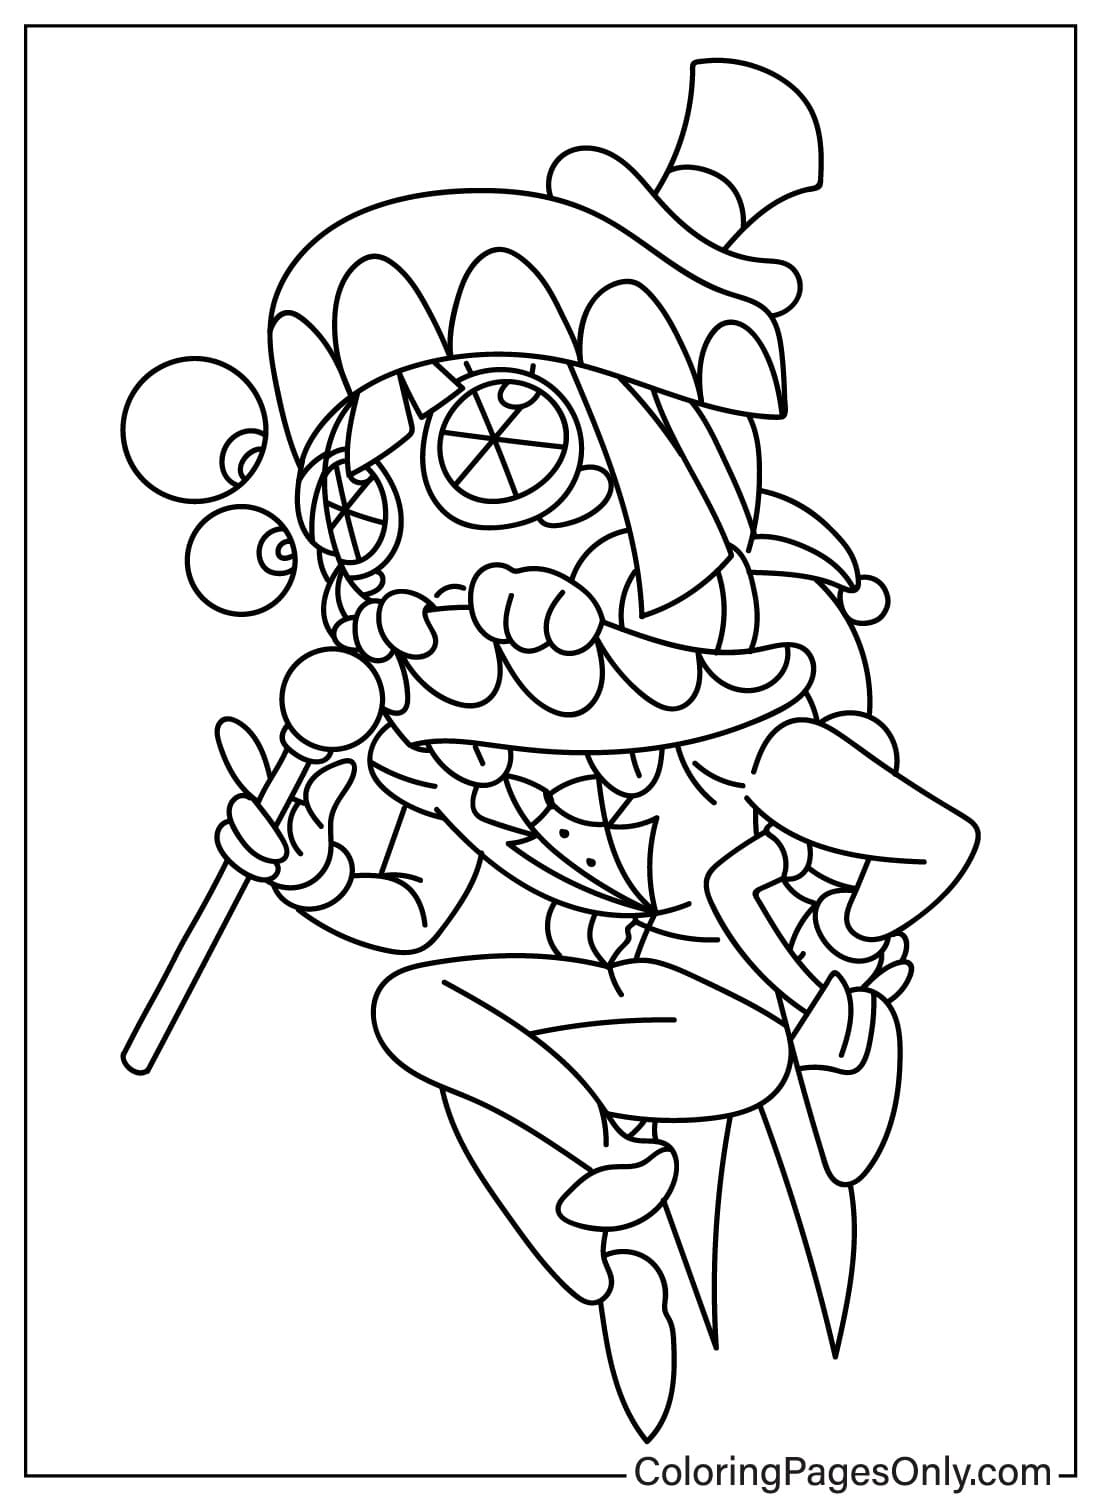 Pomni and Caine Coloring Page from Caine